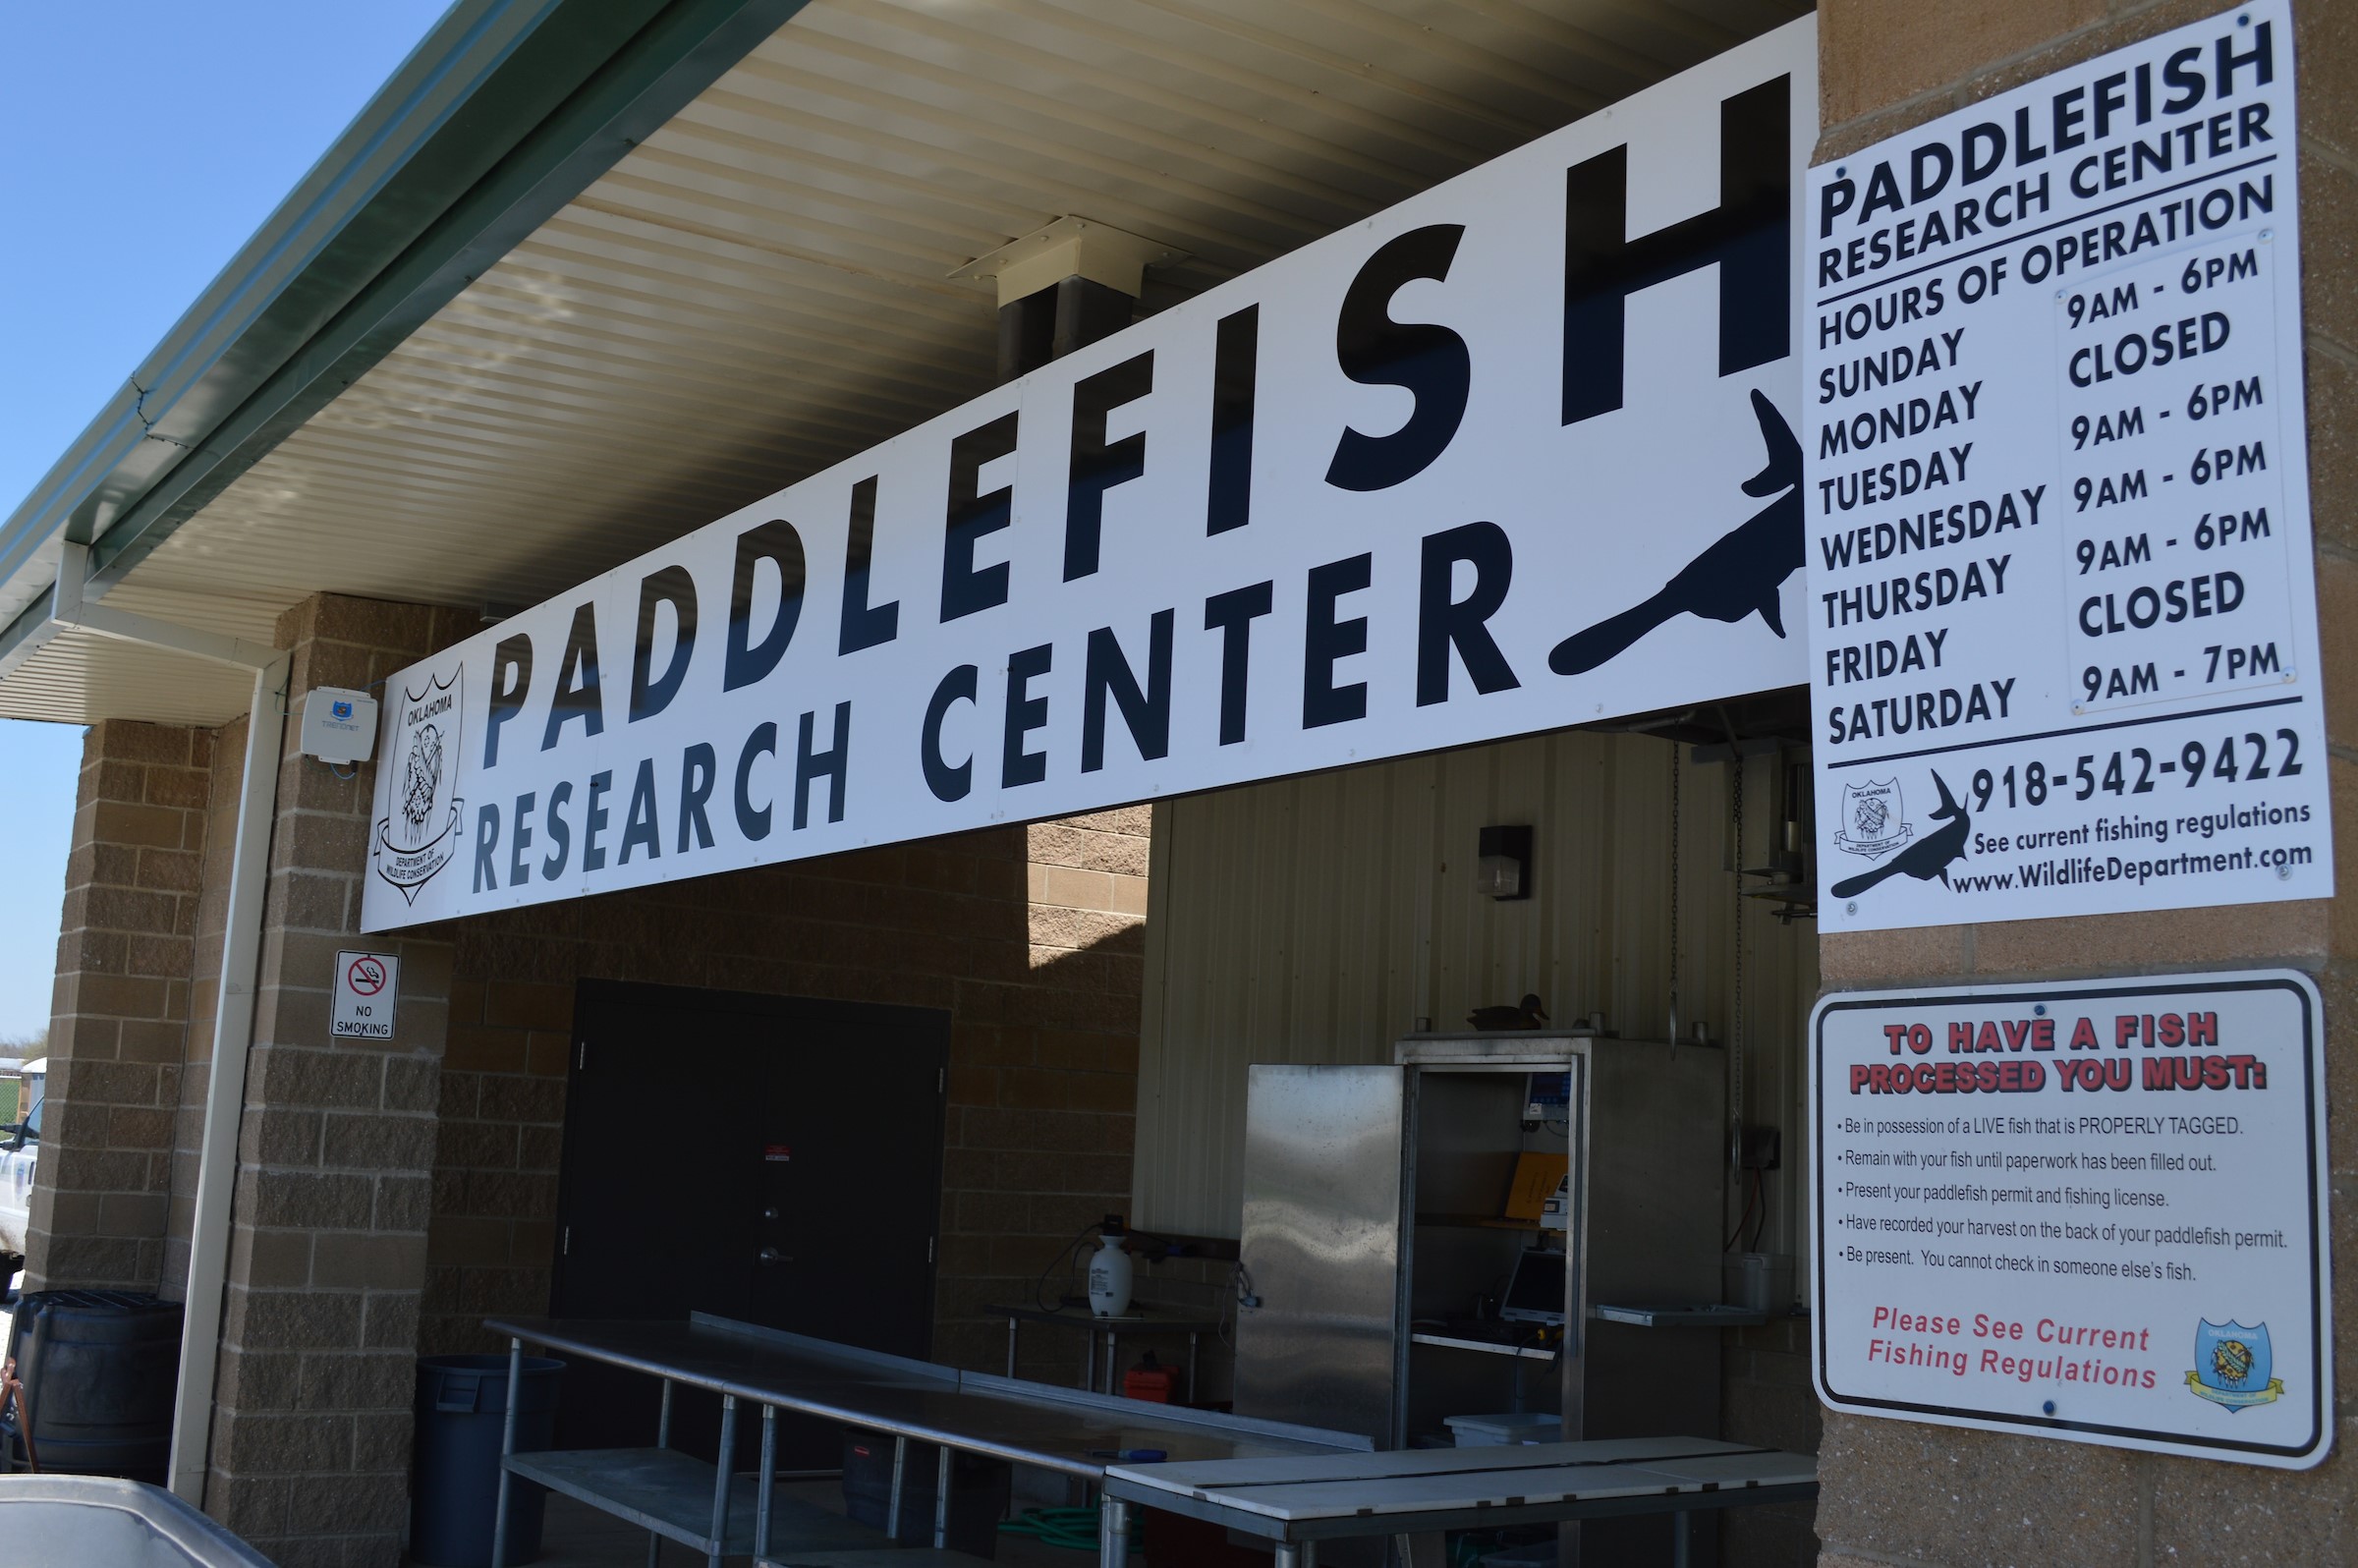 Biologists Studying Paddlefish in Oklahoma Report Research of the Fish Going 